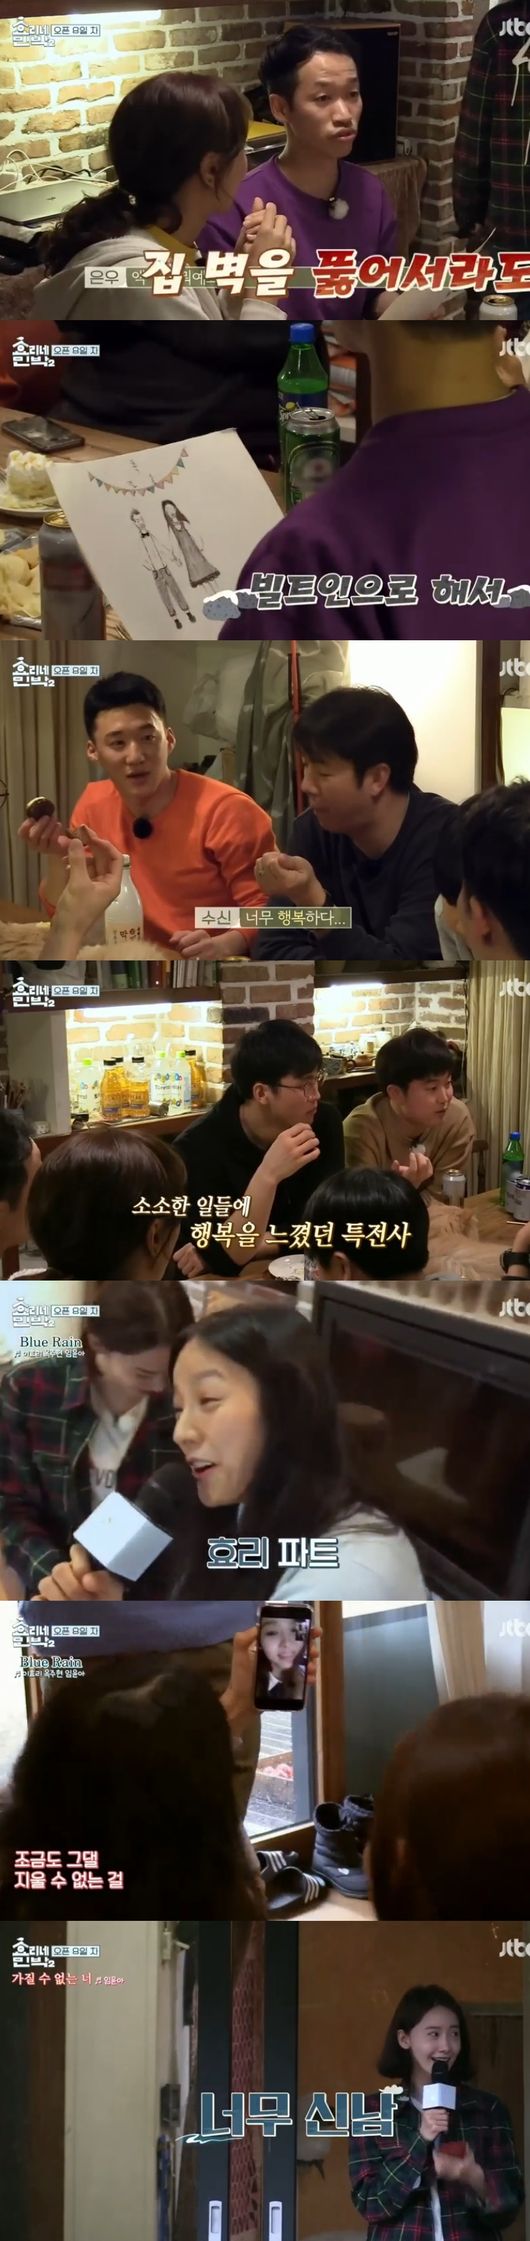 The everyday life of the four inhabitants of Hyo in rainy days was released.In the JTBC House of Hyori 2 broadcasted on 15th, Lee Hyo ri, Yoona, Sang Soon, who celebrated the eighth day, was put in the figure.On this day Yoona went to work earlier than usual and got breakfast.Ham glue rolled, vegetables rolled gifts gifted a dexterous part-time job.After many customers came Hyeori and early in the open-air bath had a healing time.